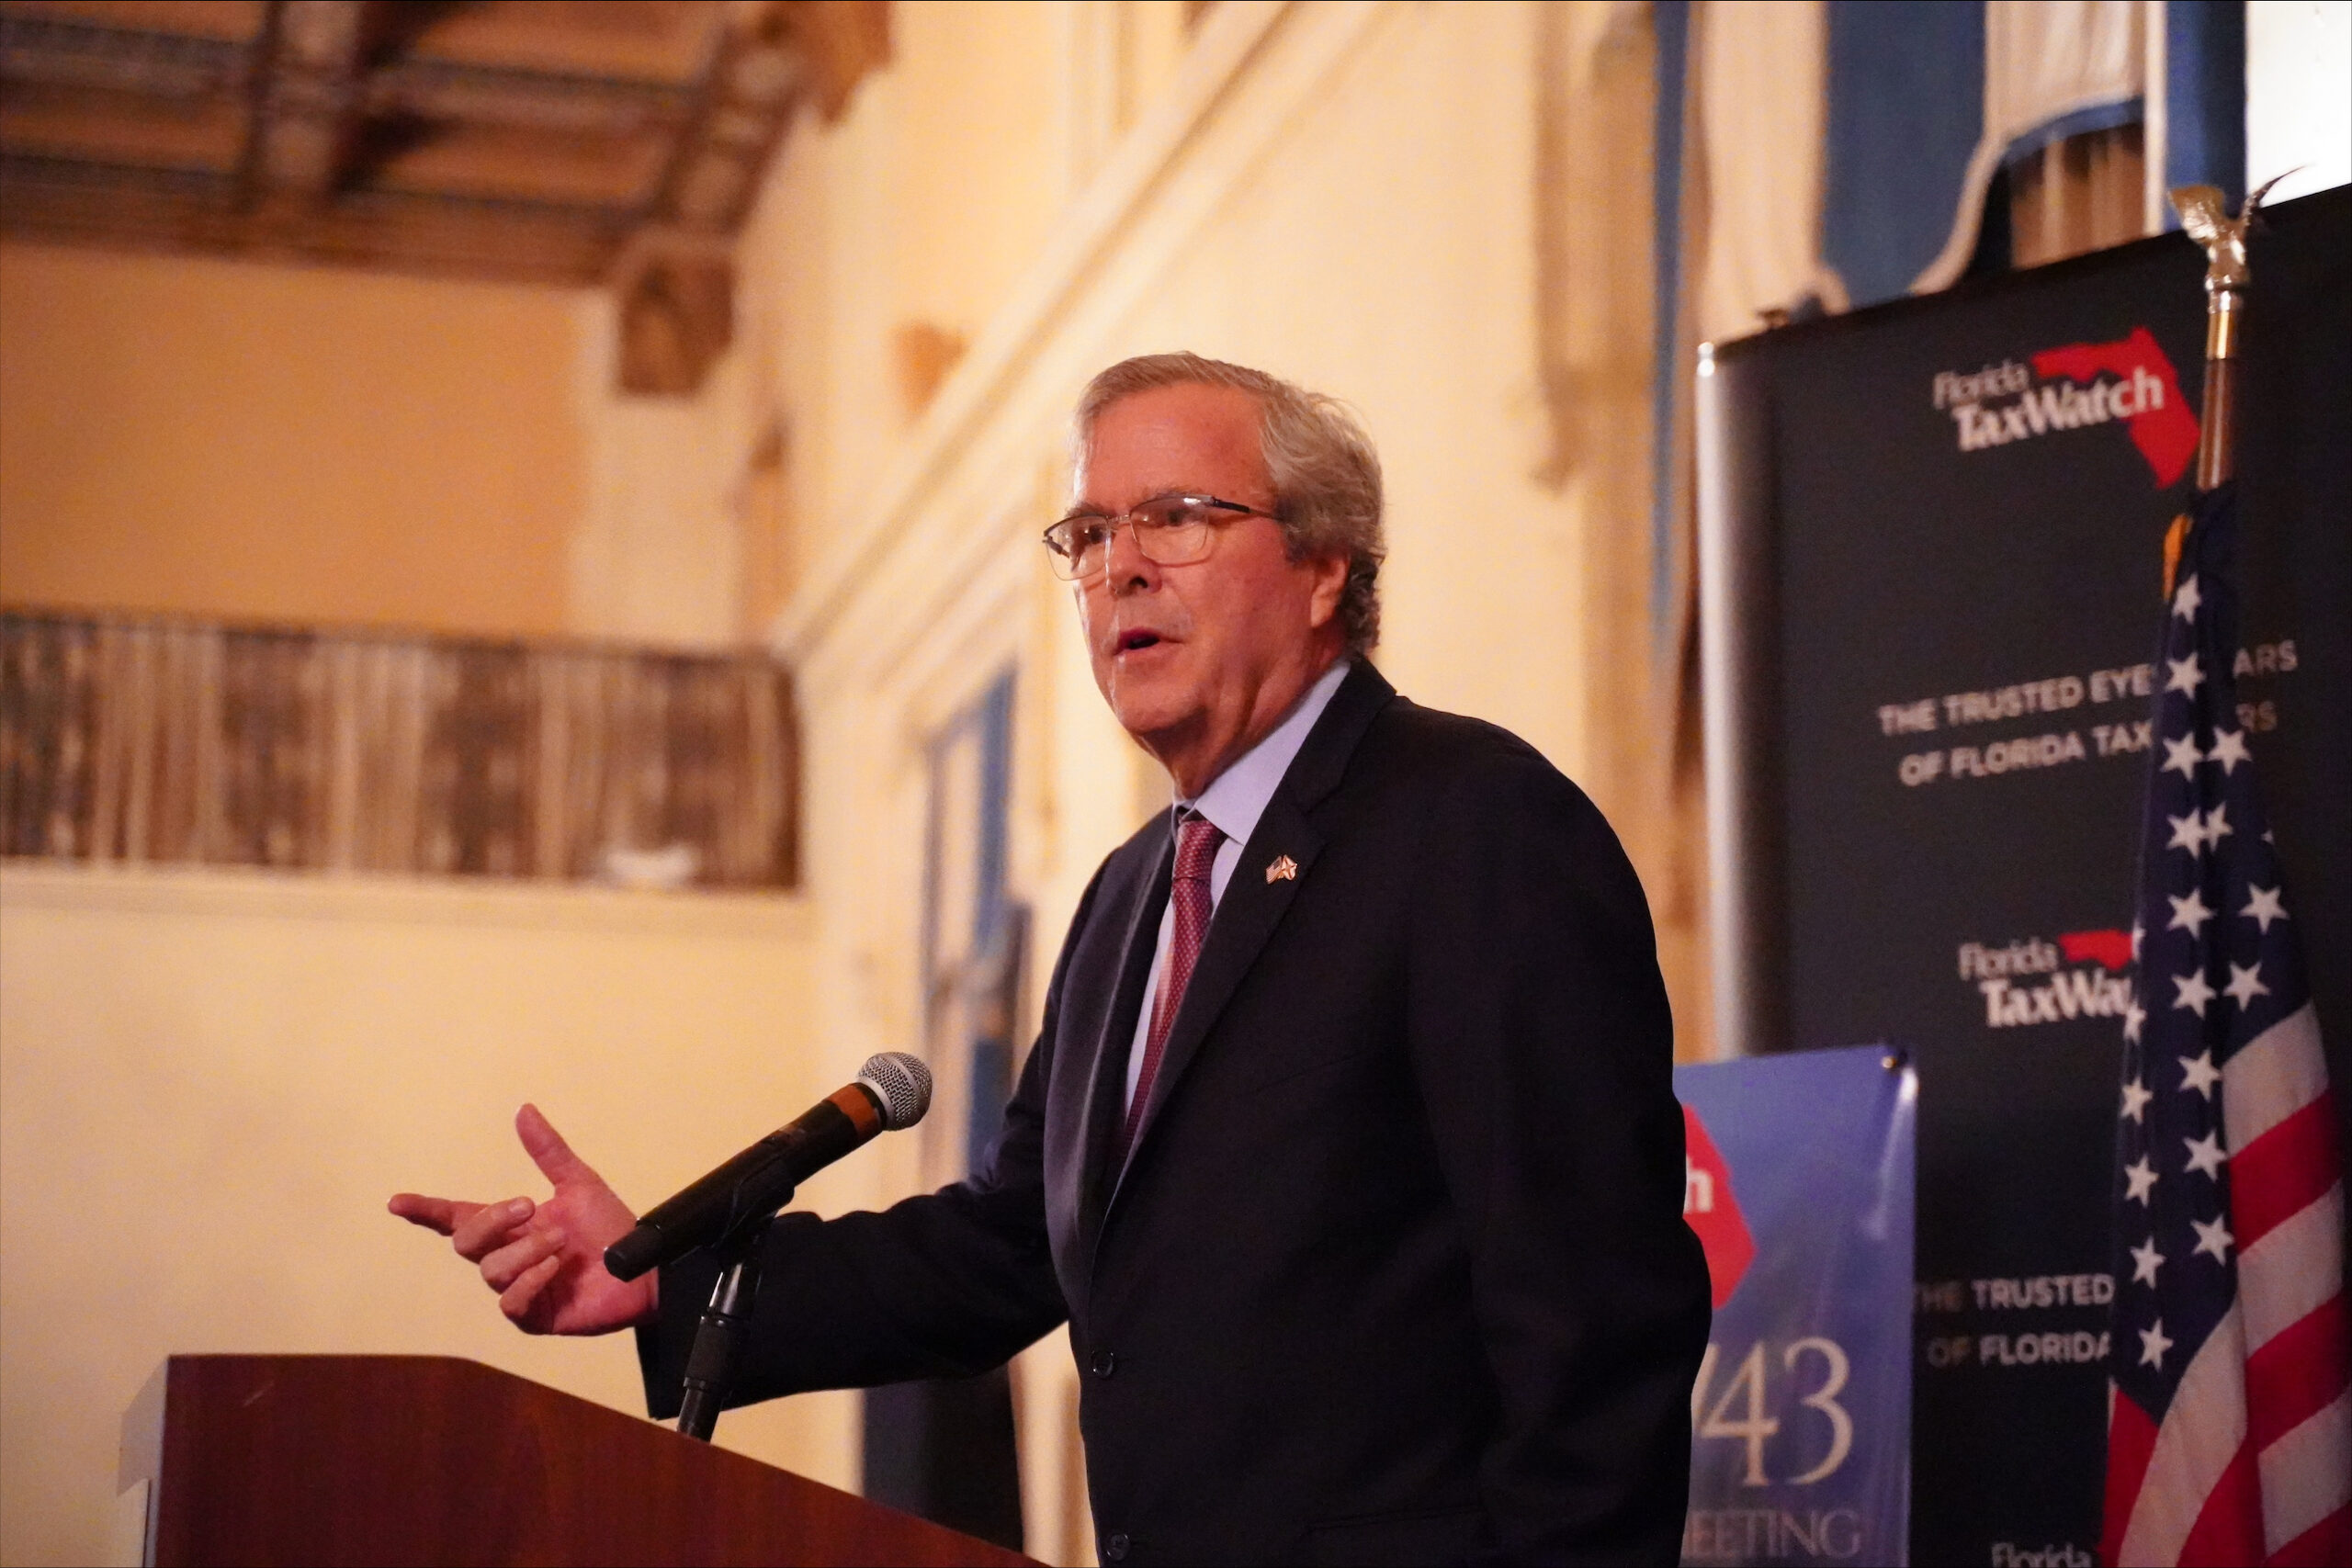 Jeb Bush warning to Florida: ‘We’re resting on our laurels’